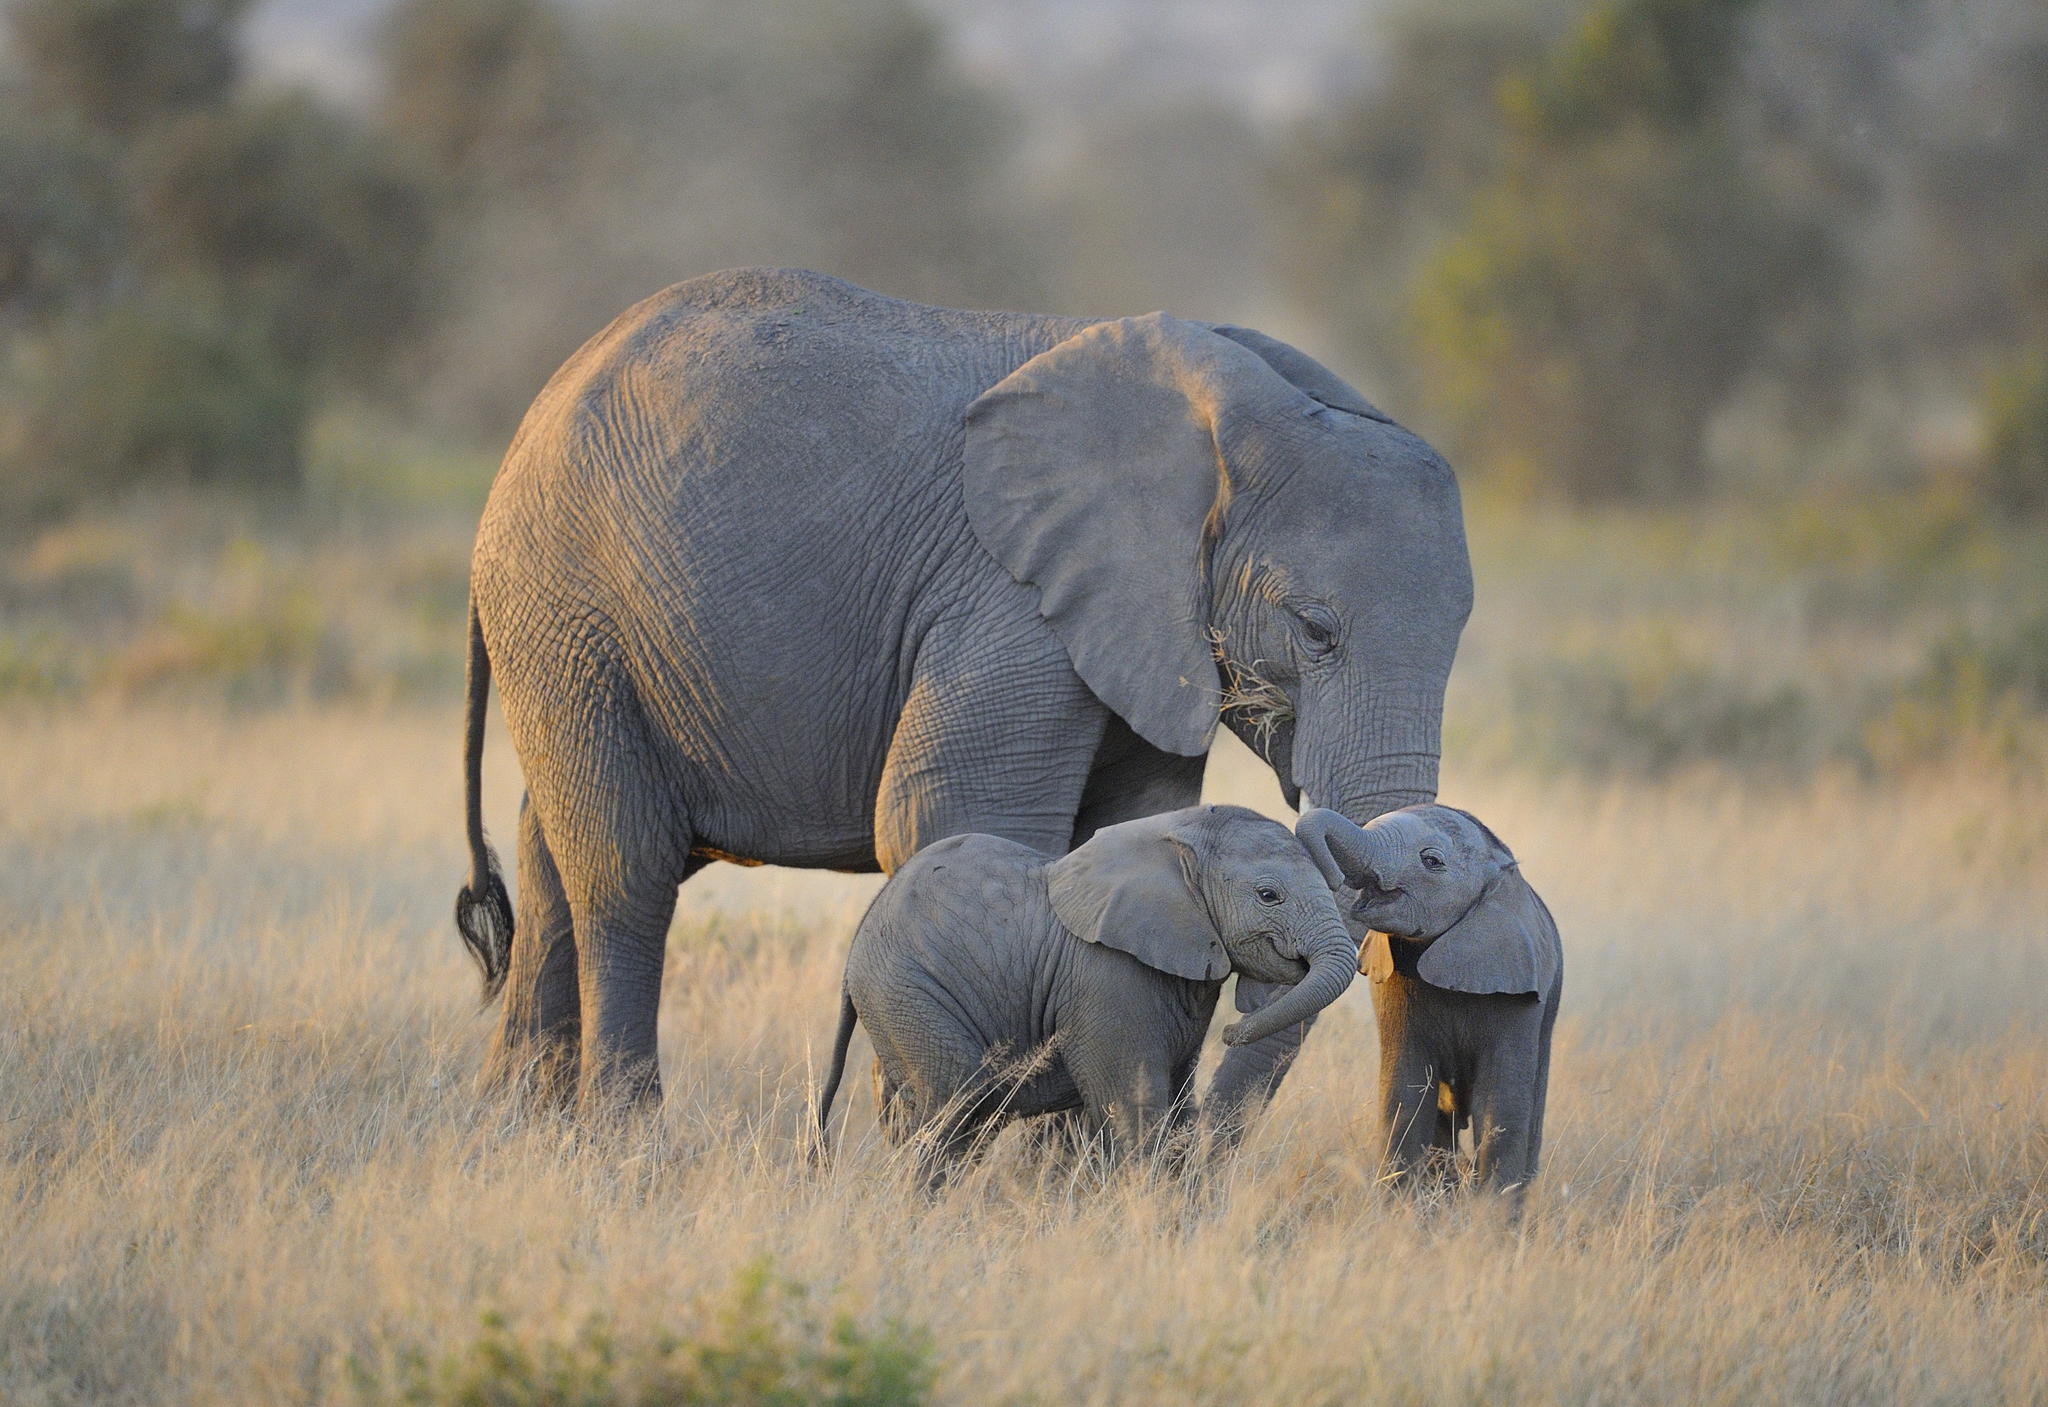 29 Adorable Baby Elephant Images That Will Brighten Up Your Day